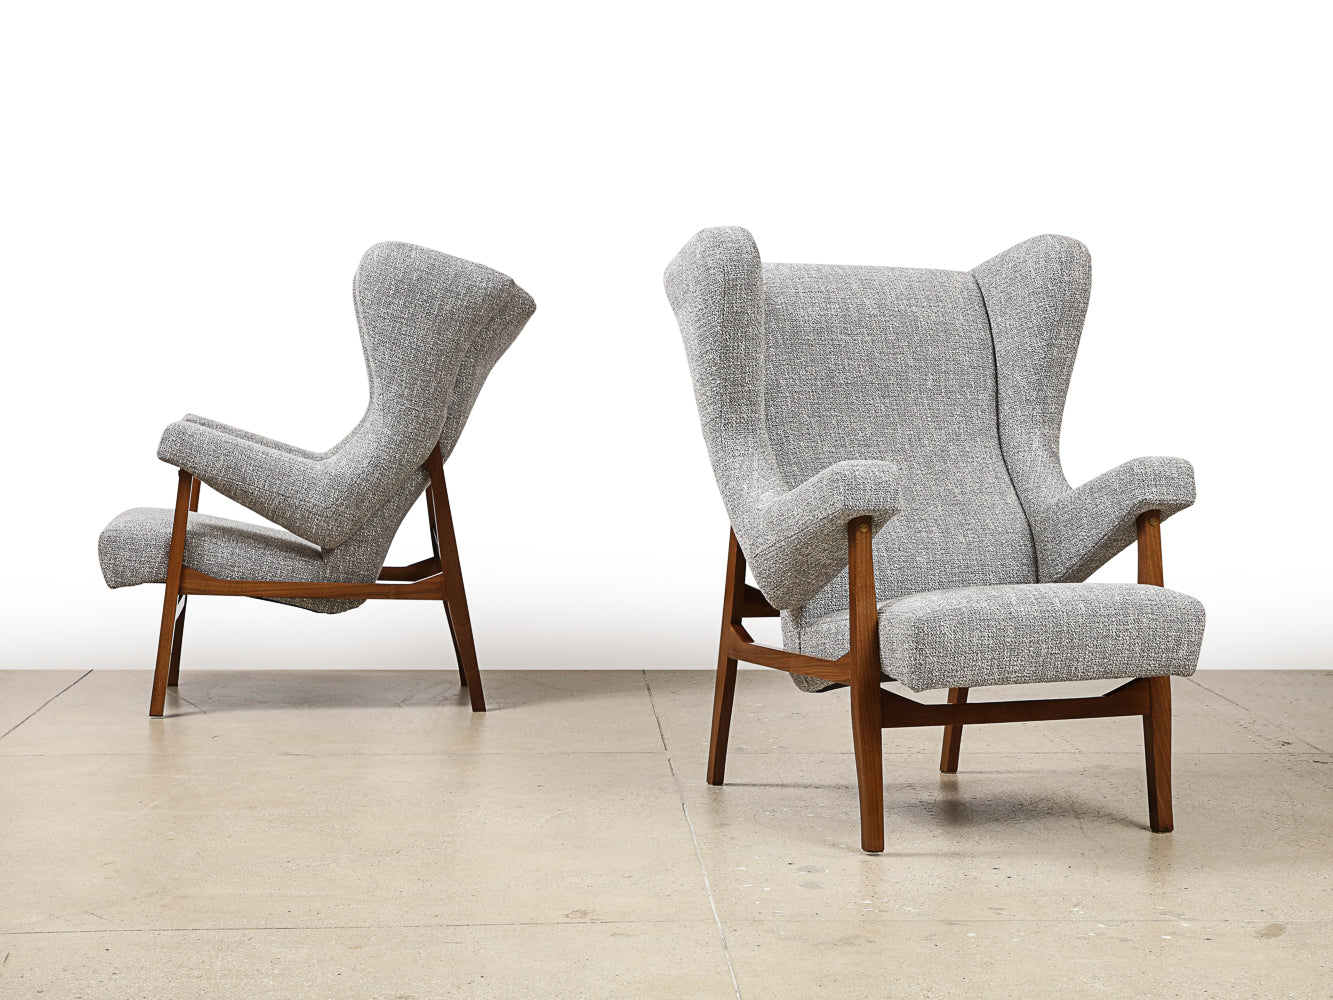 Pair of Fiorenza Lounge Chairs by Franco Albini for Arflex